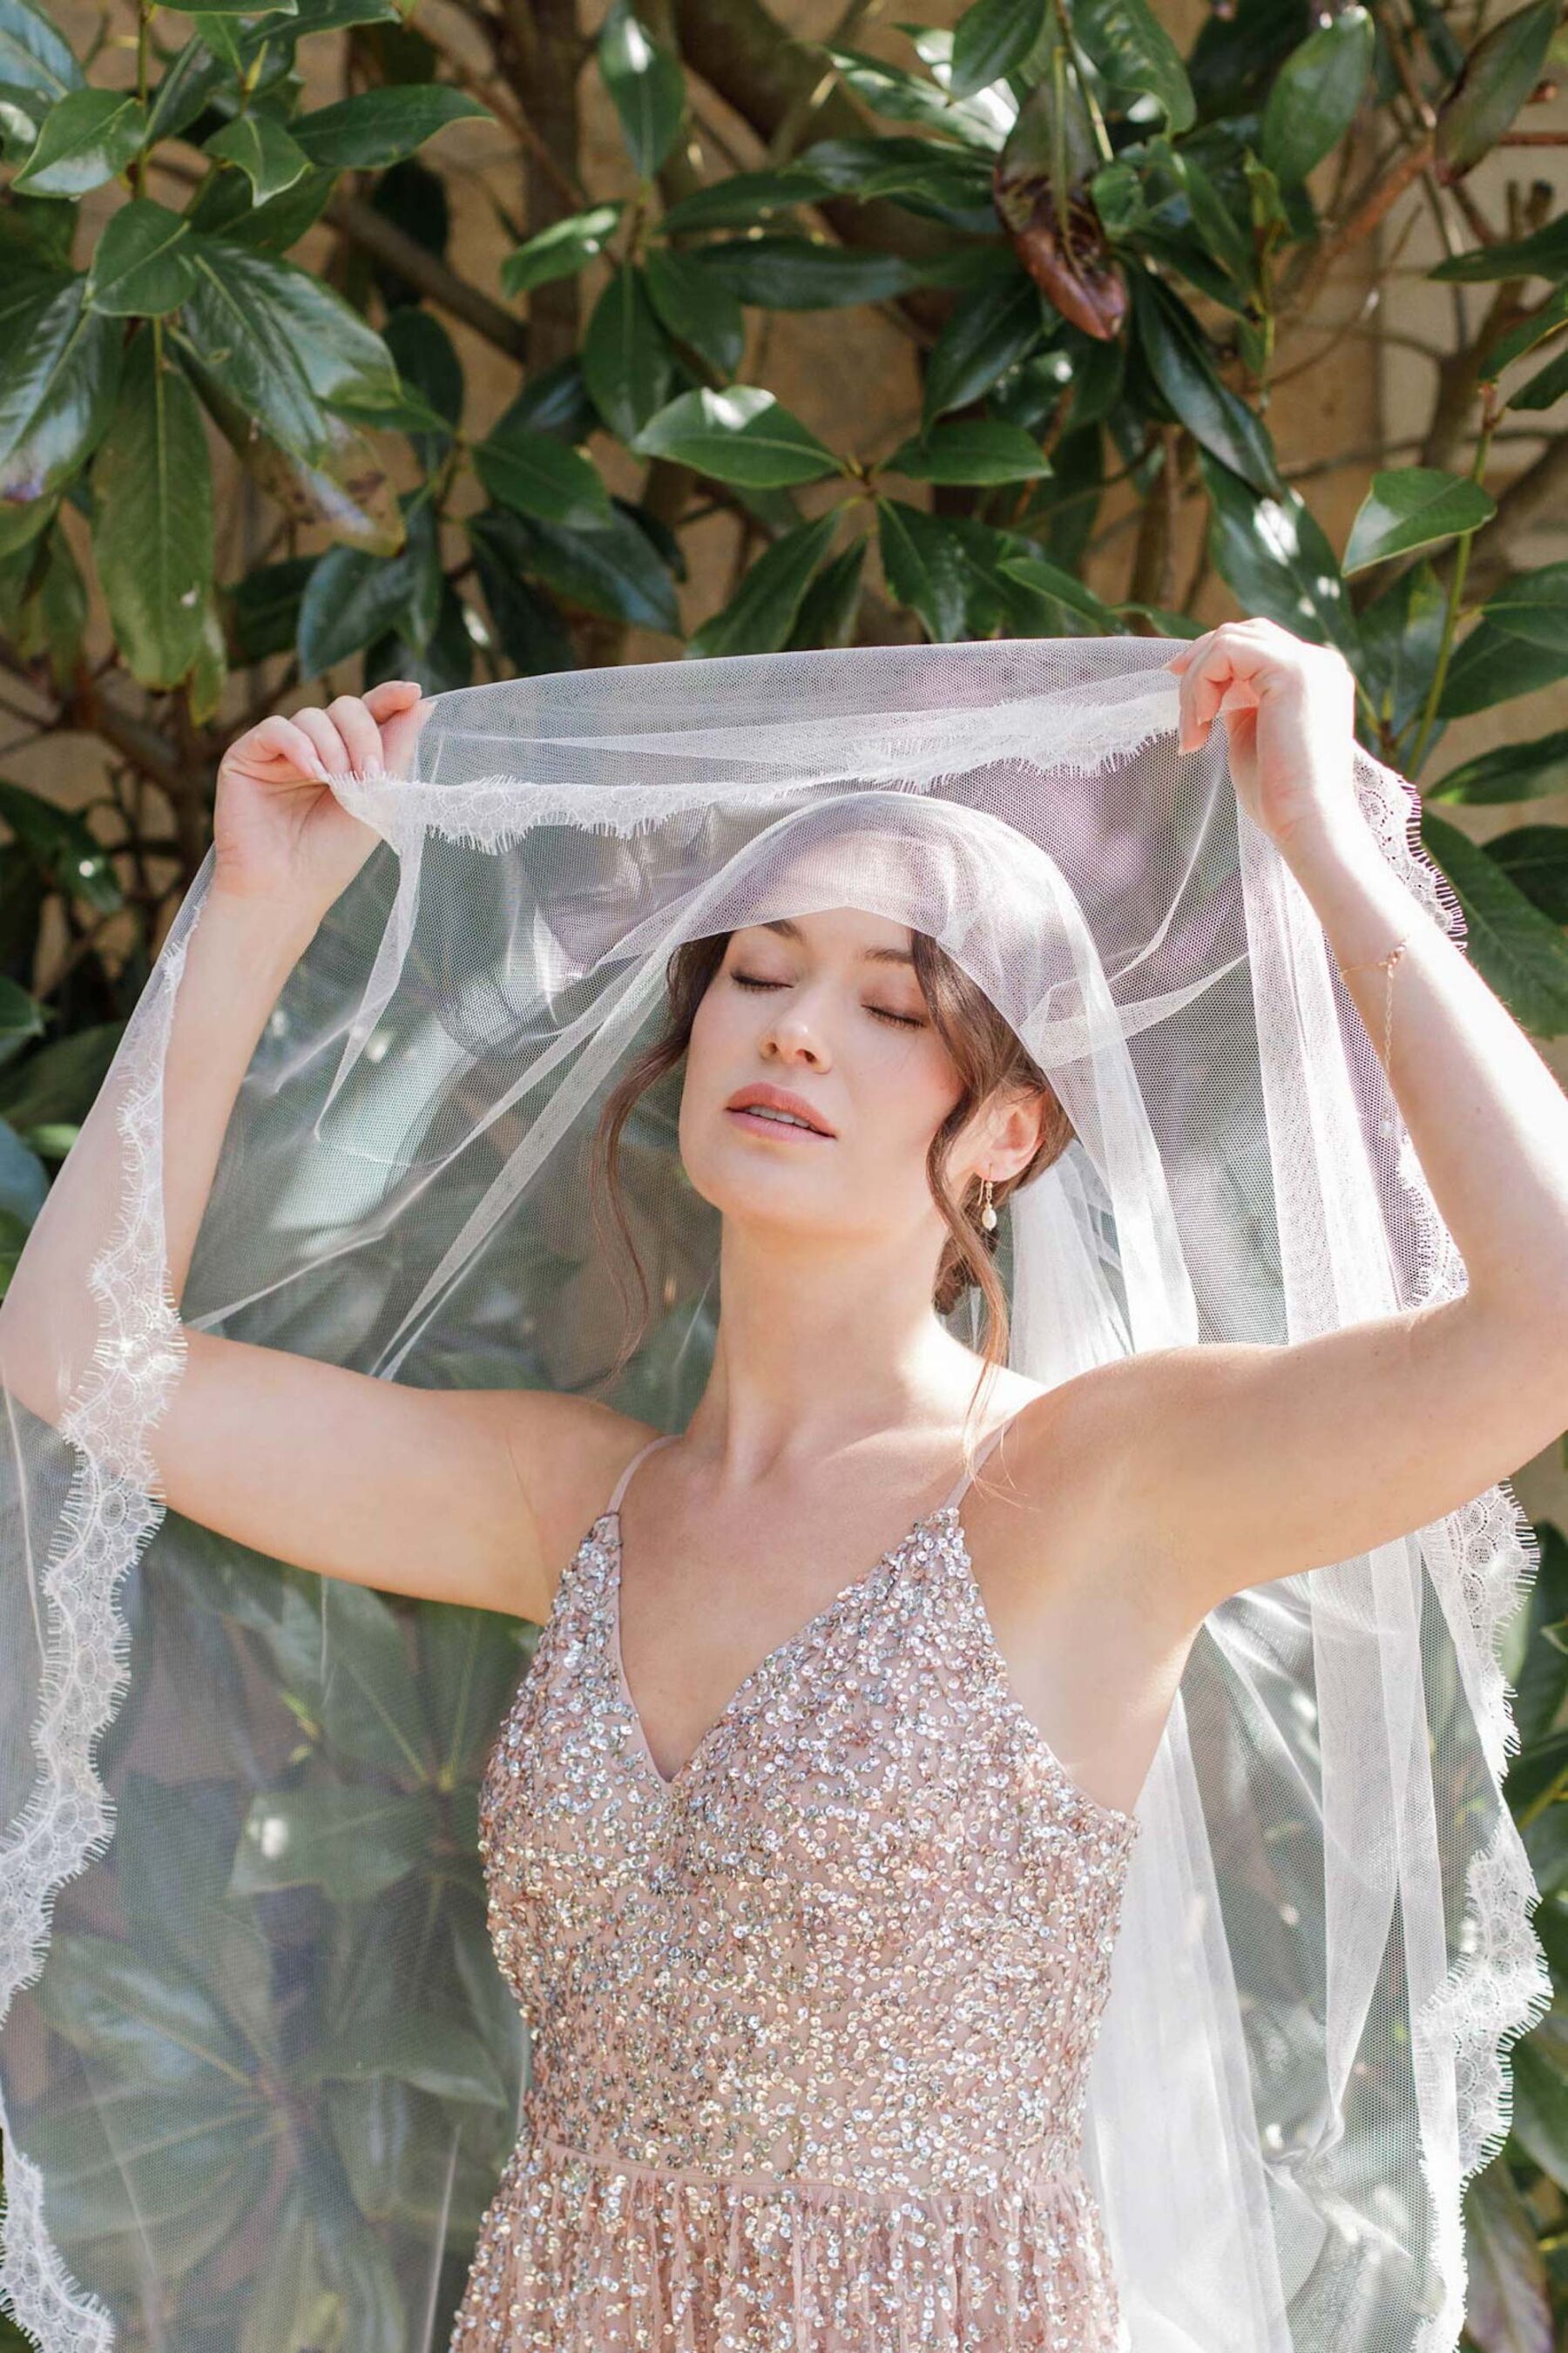 Elegant Lace trim wedding veil by Britten Weddings. Bride lifting the veil to reveal her face.